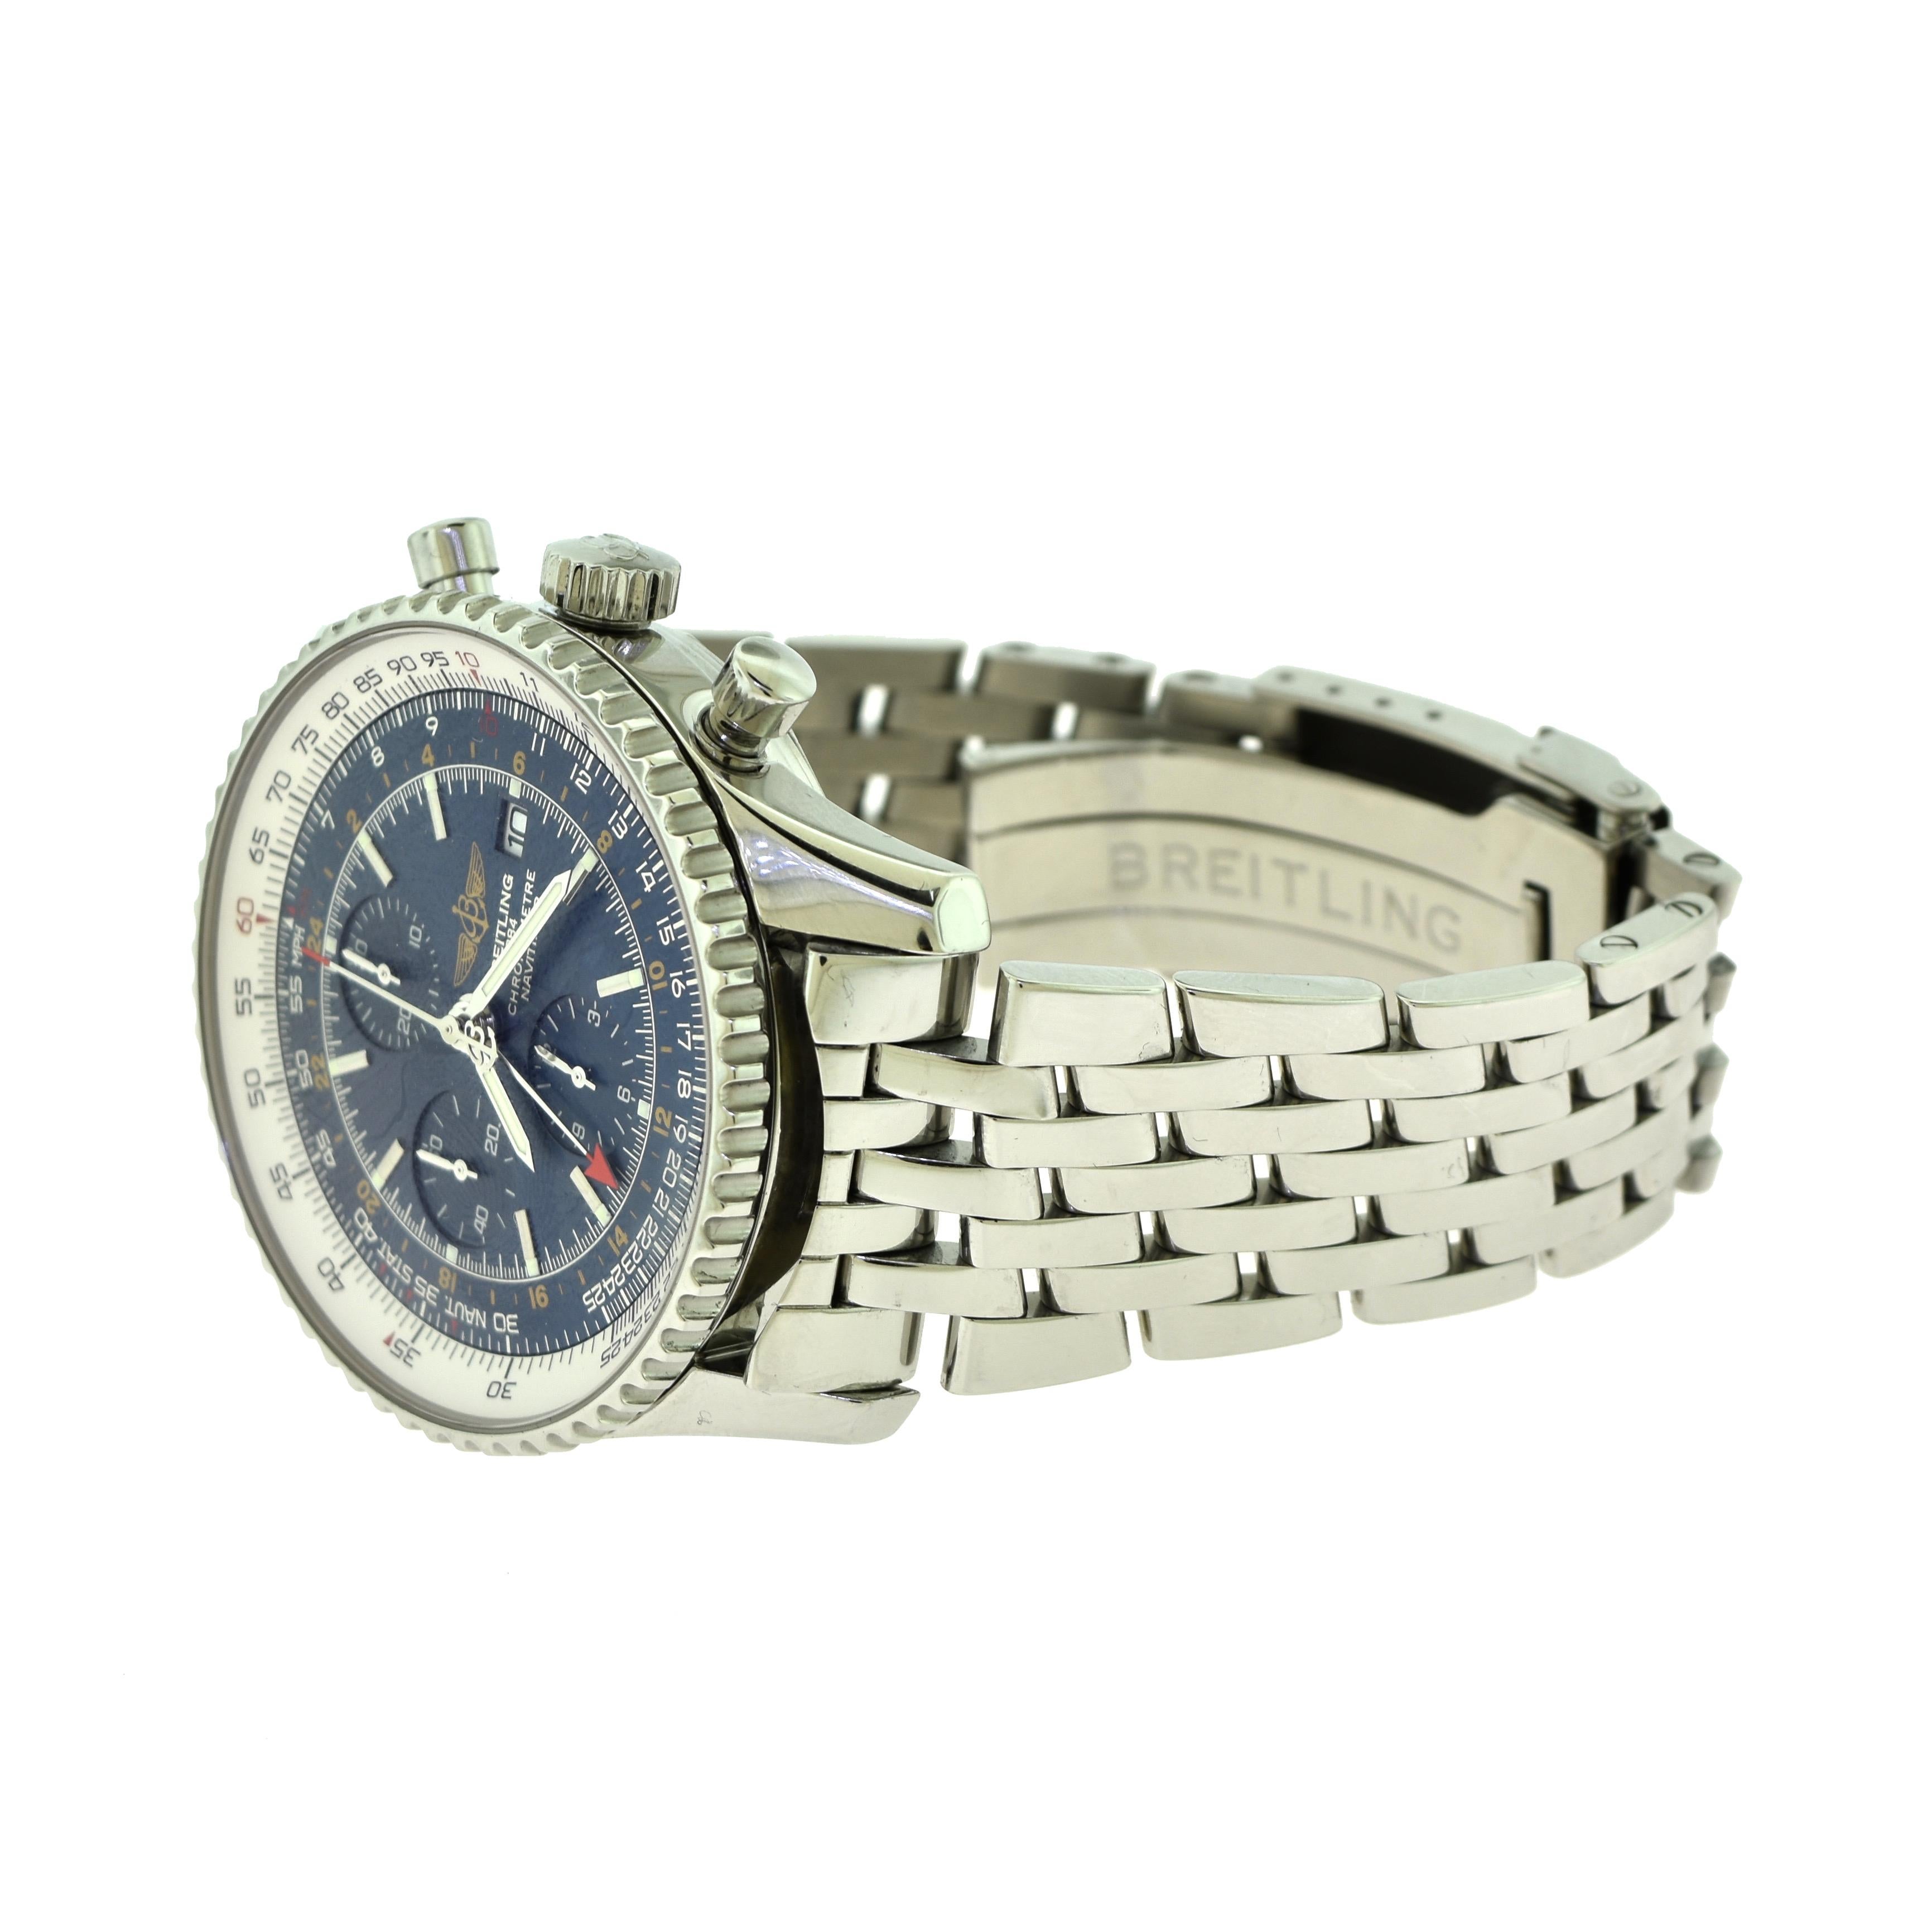 Brilliance Jewels, Miami
Questions? Call Us Anytime!
786,482,8100

Brand: Breitling

Model: Navitimer World

Ref. No.: A24322/C561

Movement: Self Winding Automatic Chronometer 

Case Size: 46 mm

Case Material: Stainless Steel

Dial: Tachymeter